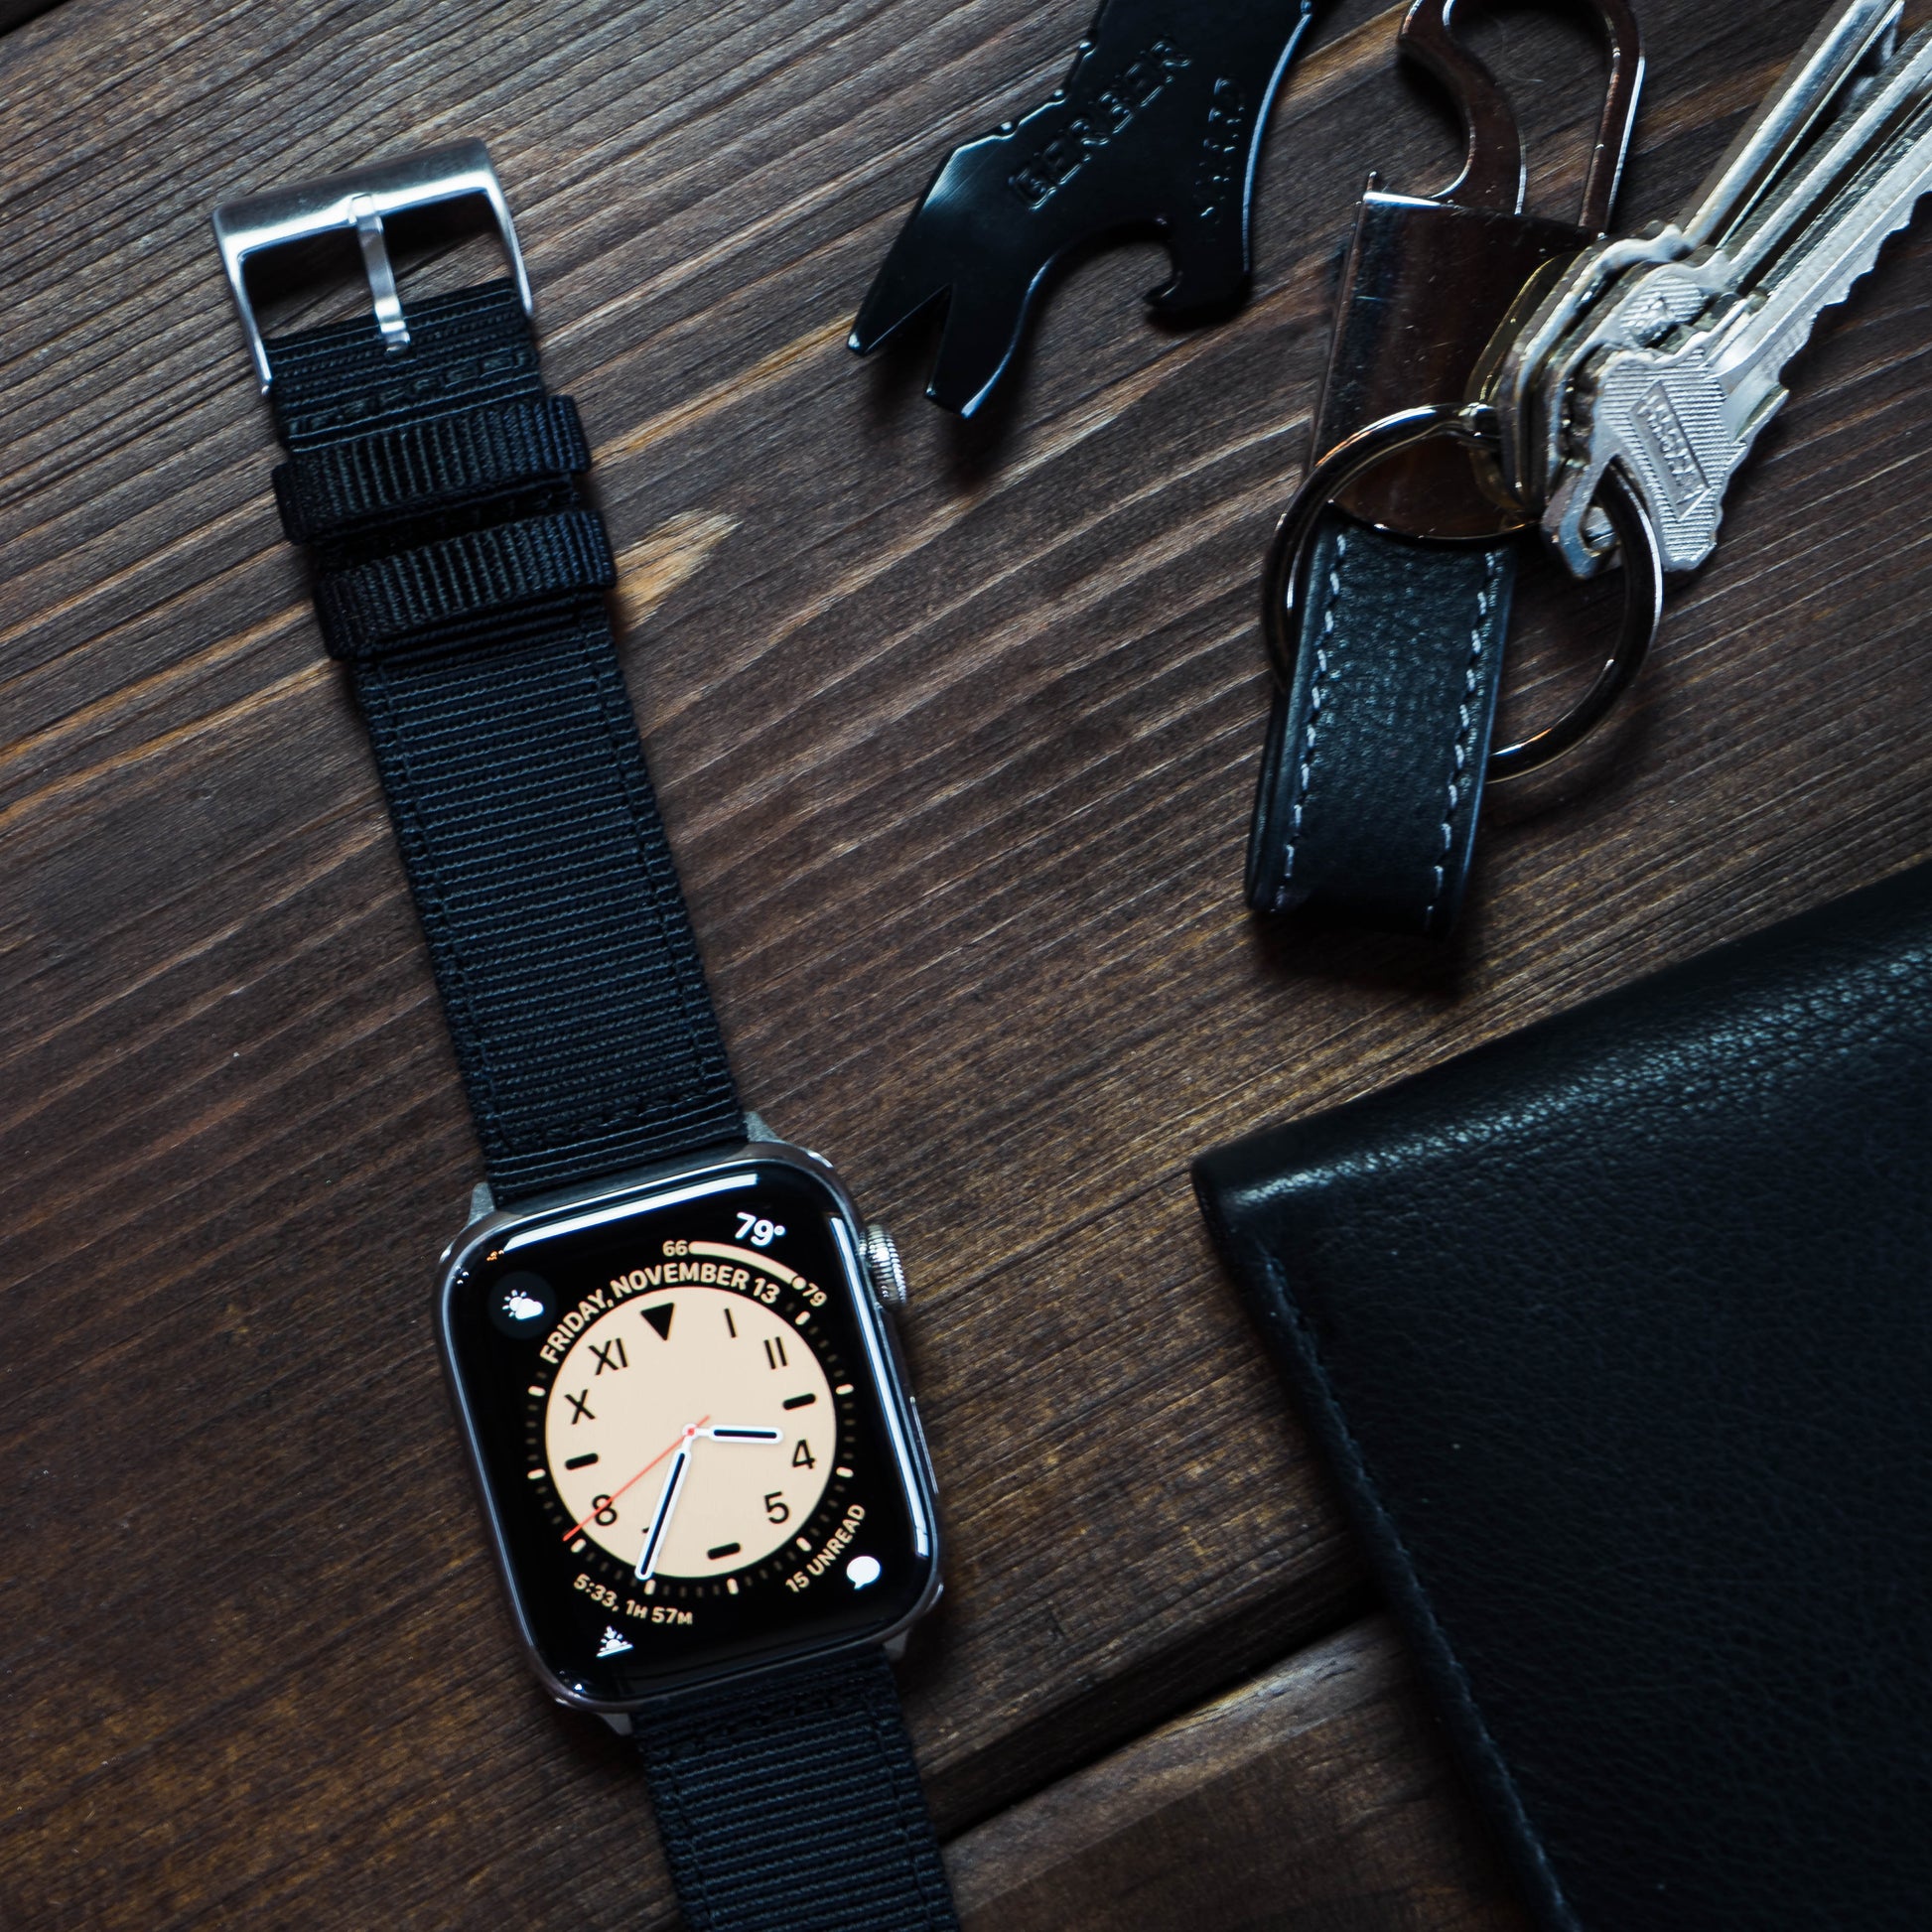 Barton Two-Piece NATO Style Watch Band / Strap for Apple Watch